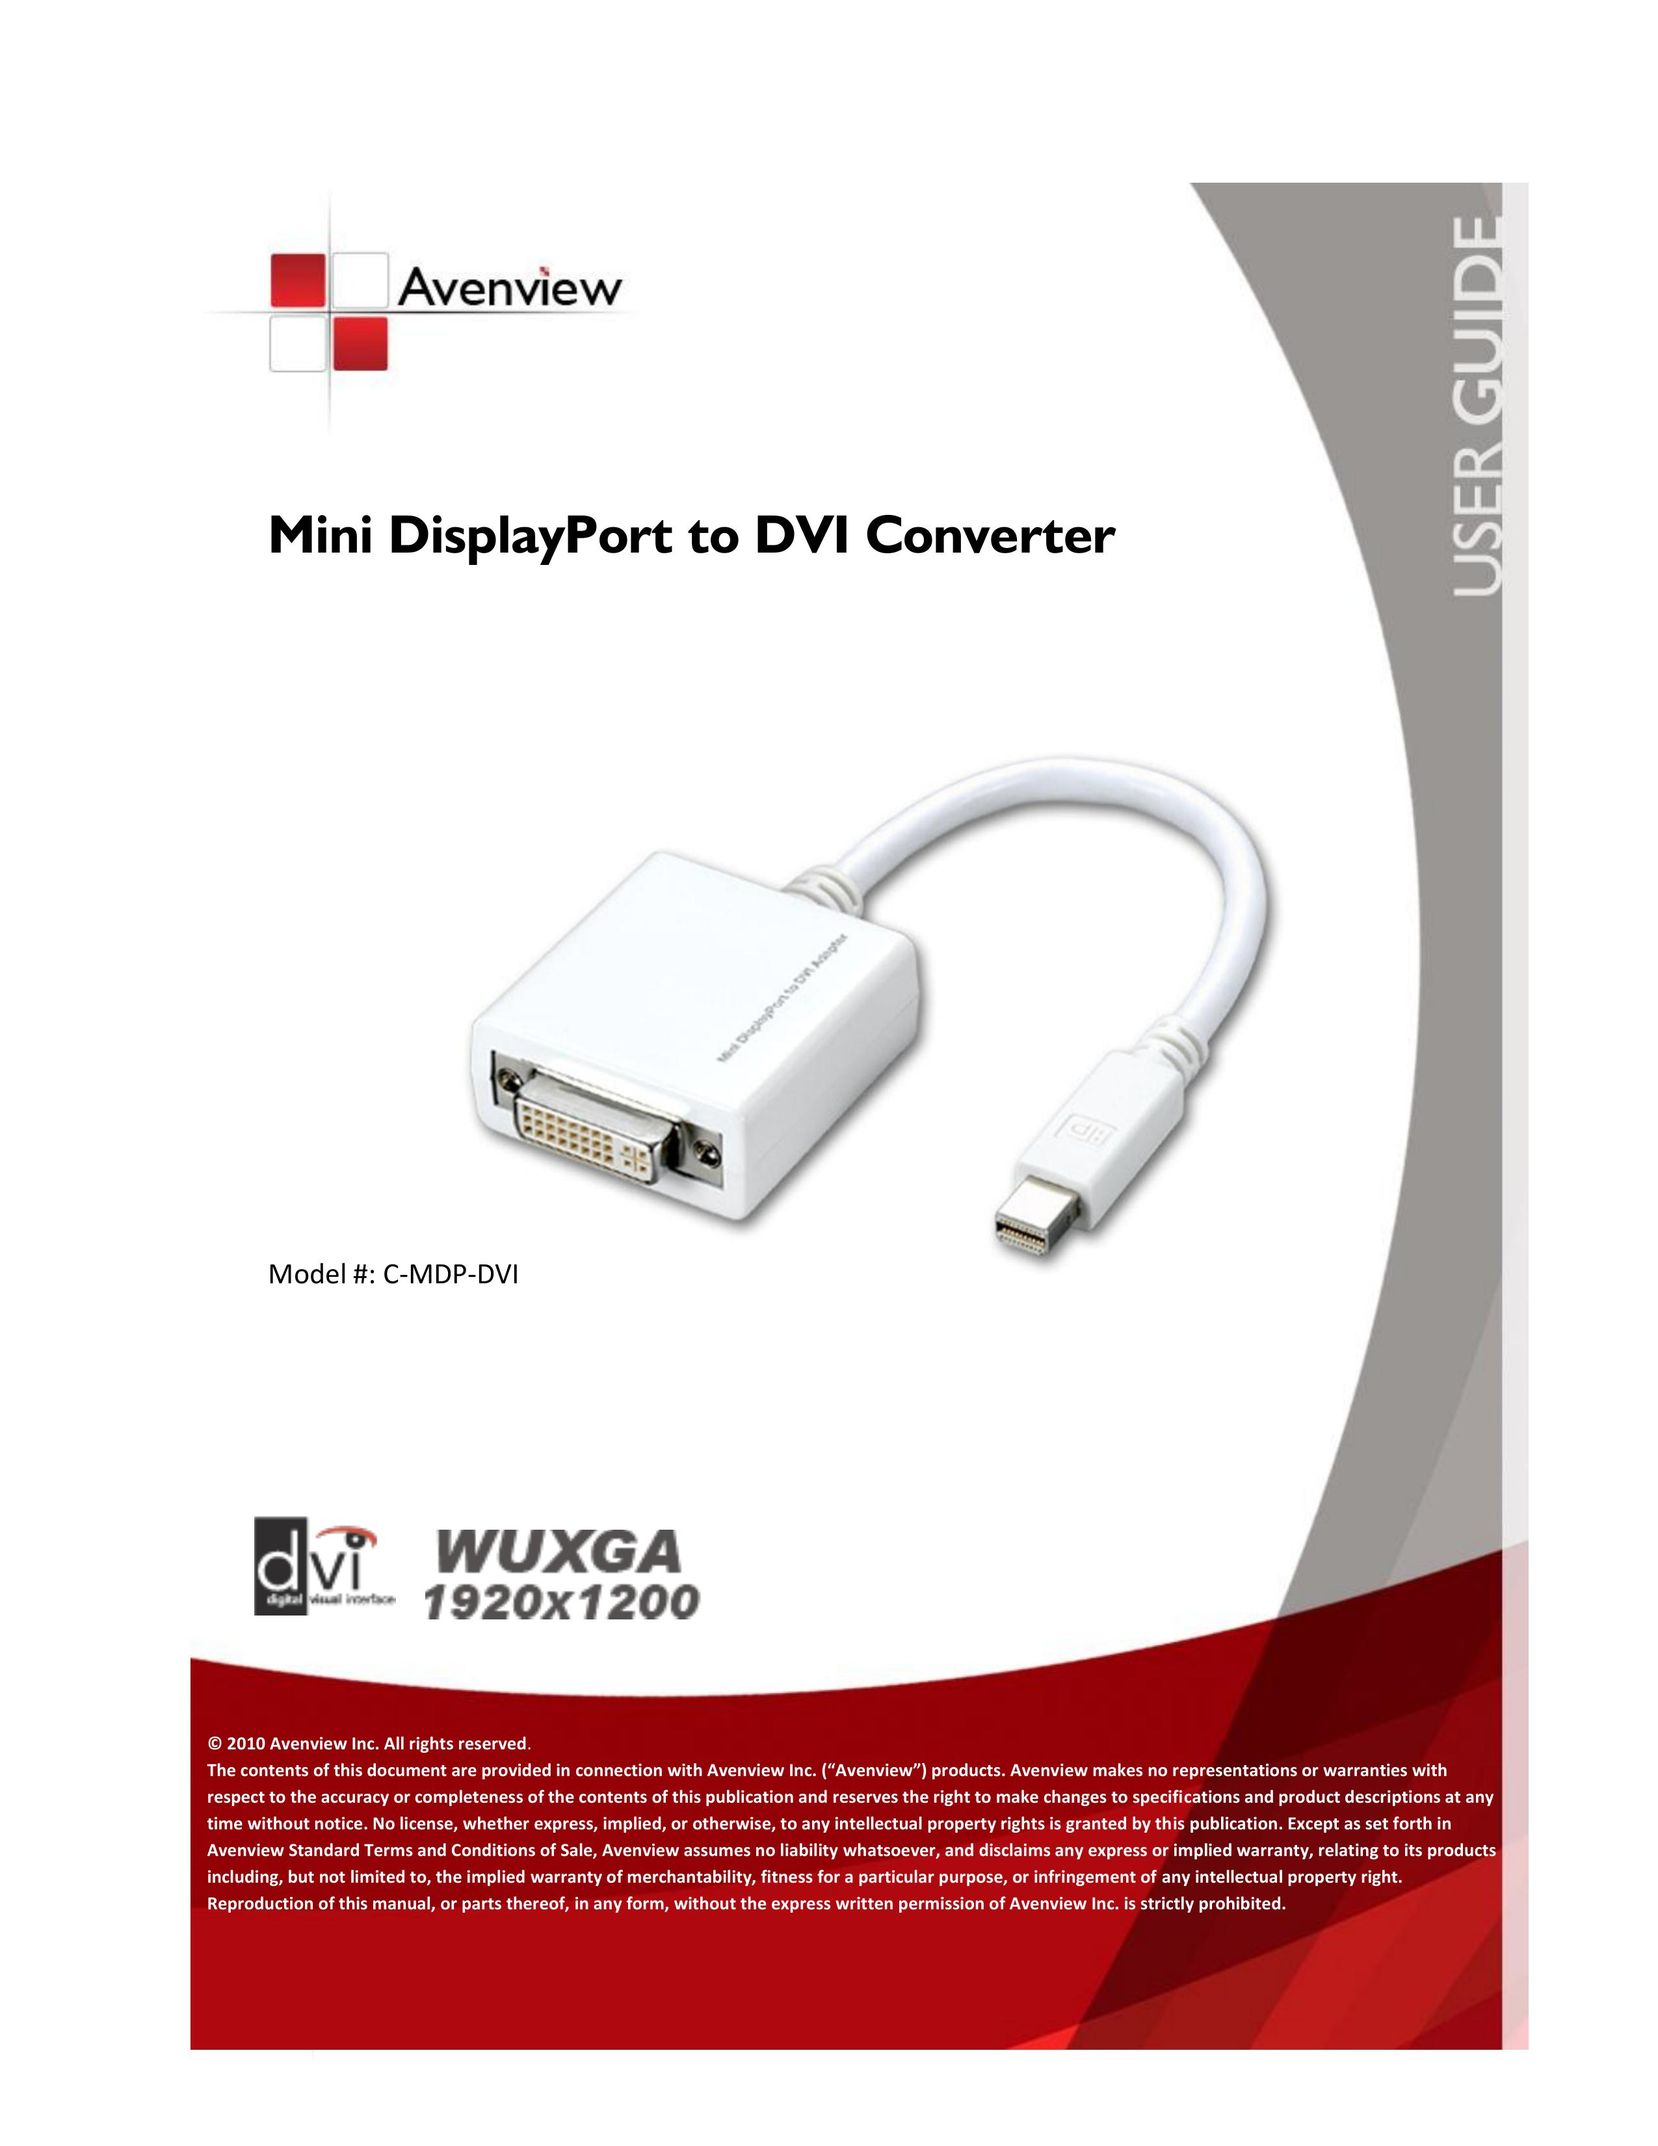 Avenview C-MDP-DVI Cable Box User Manual (Page 1)